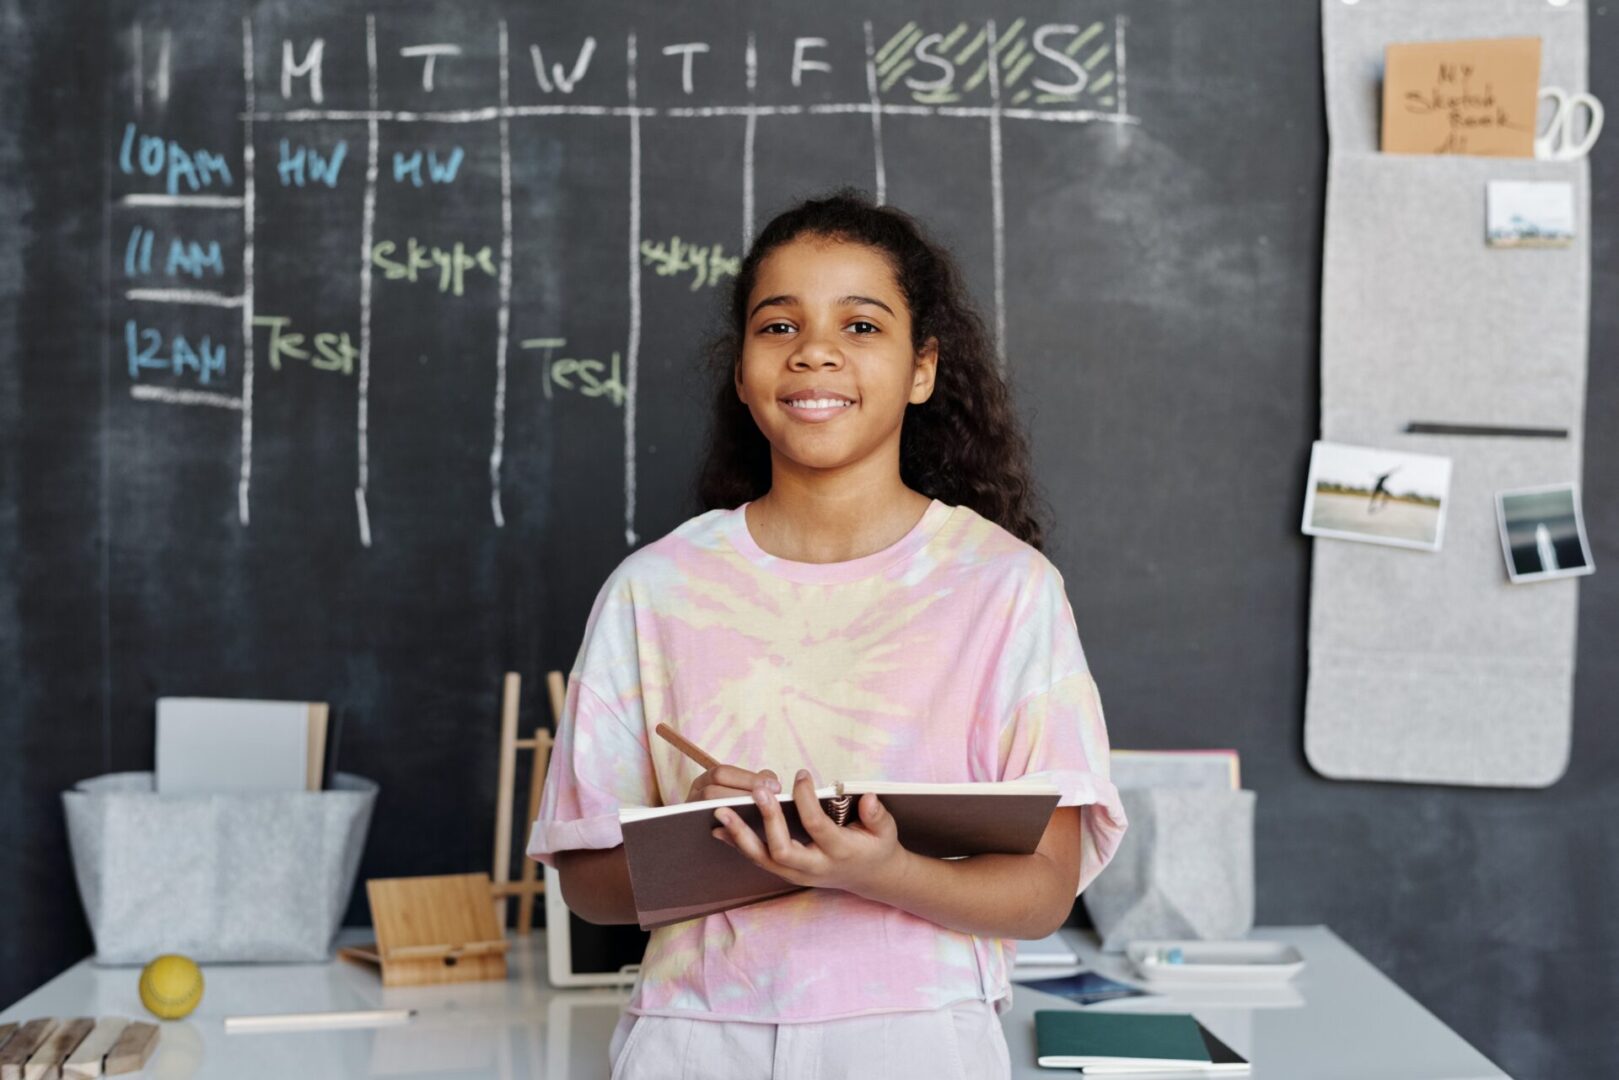 A girl holding a notebook in front of a chalkboard.